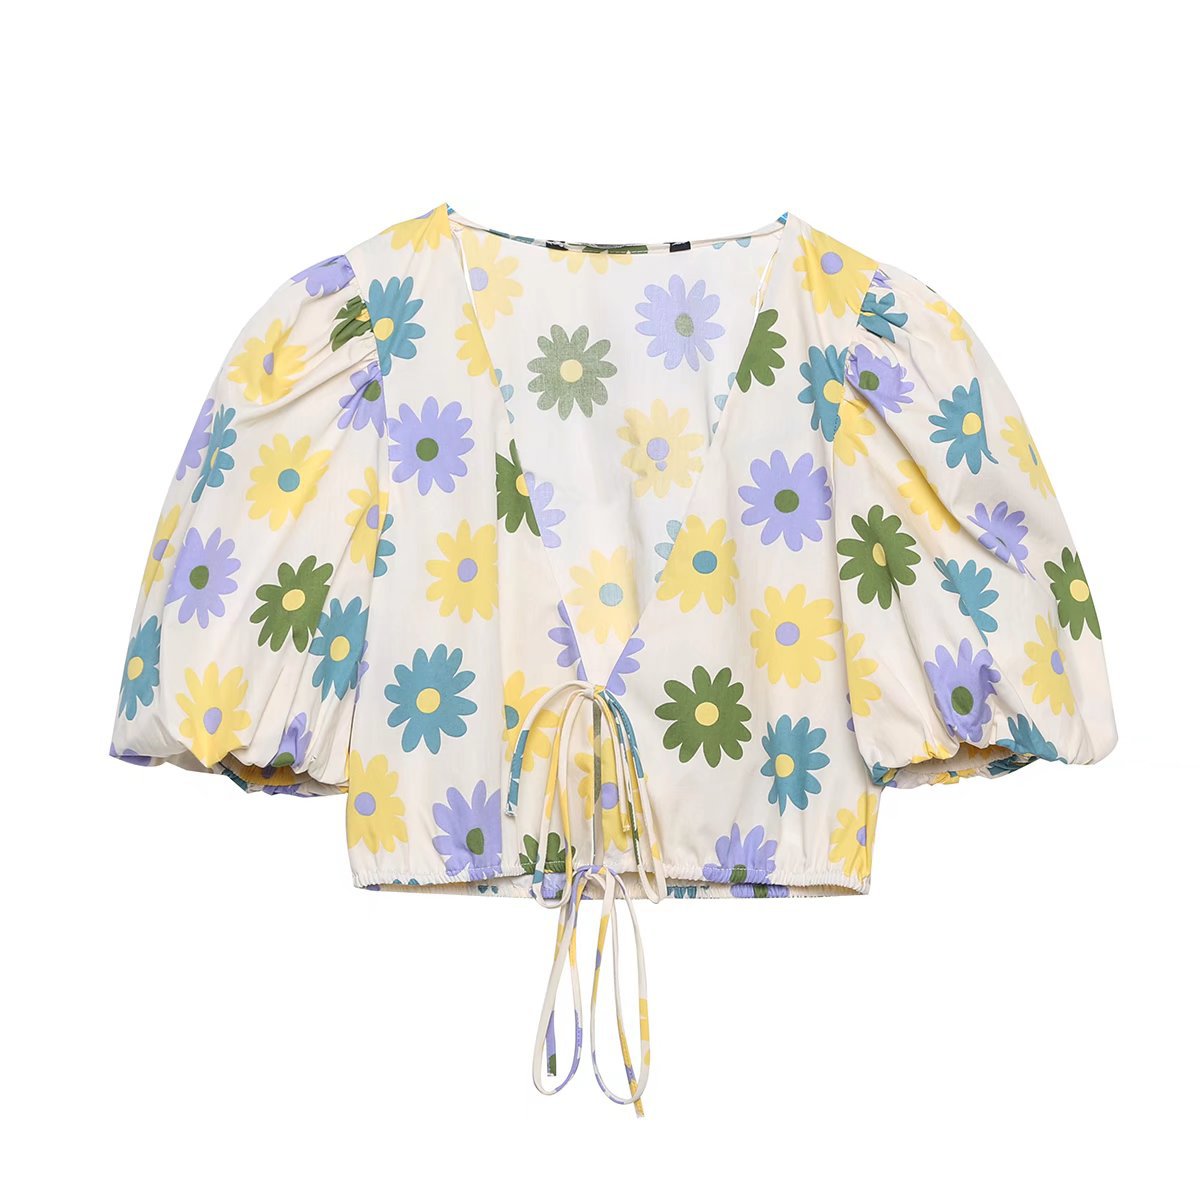 Flower Power Tie Front 1960s Style Blouse